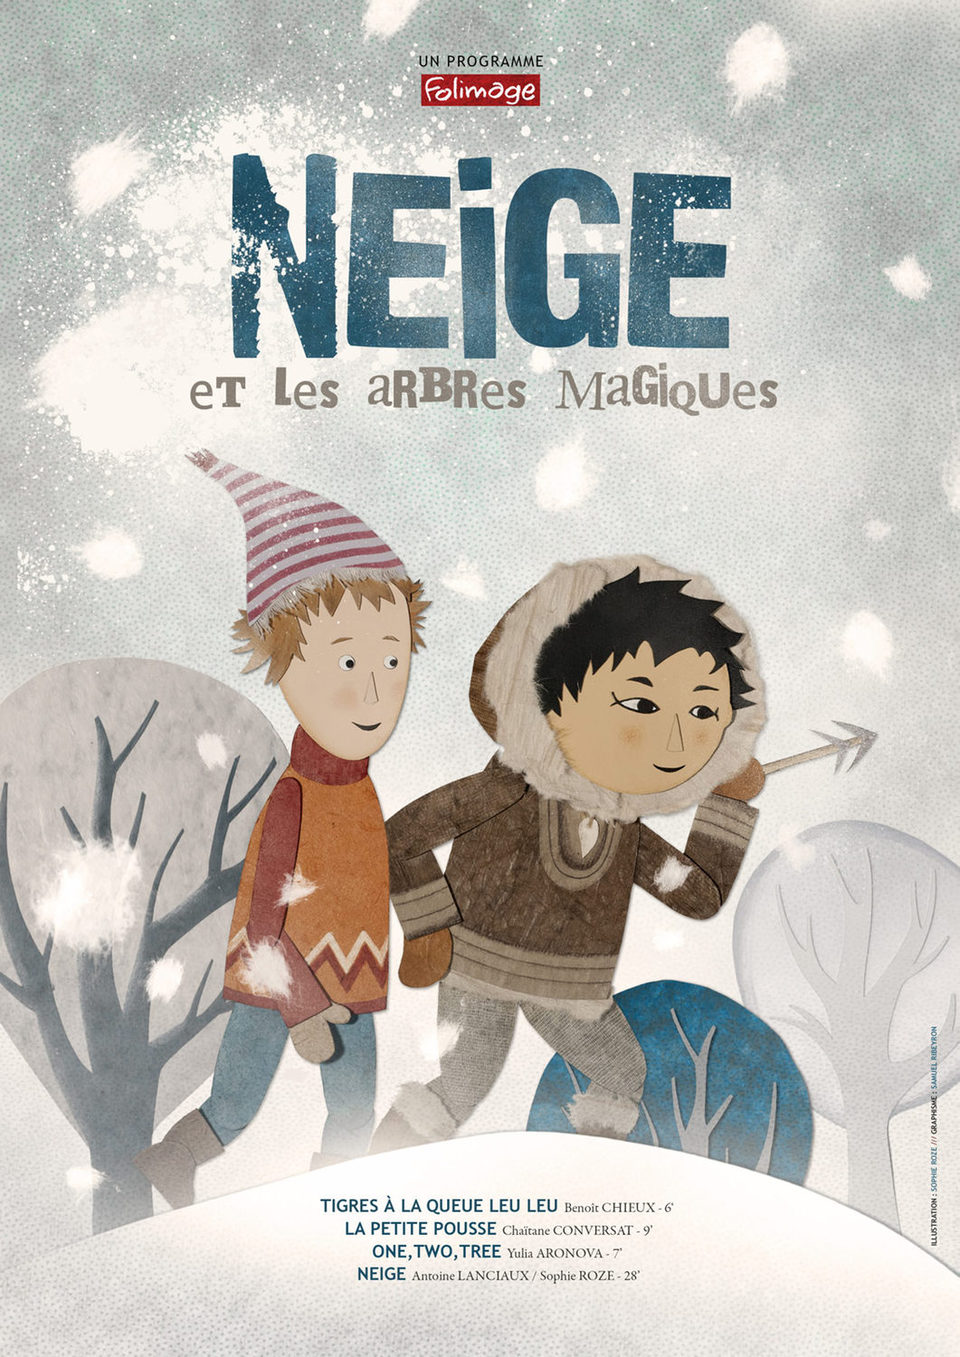 Poster of Snow and the Magic Trees - Francia